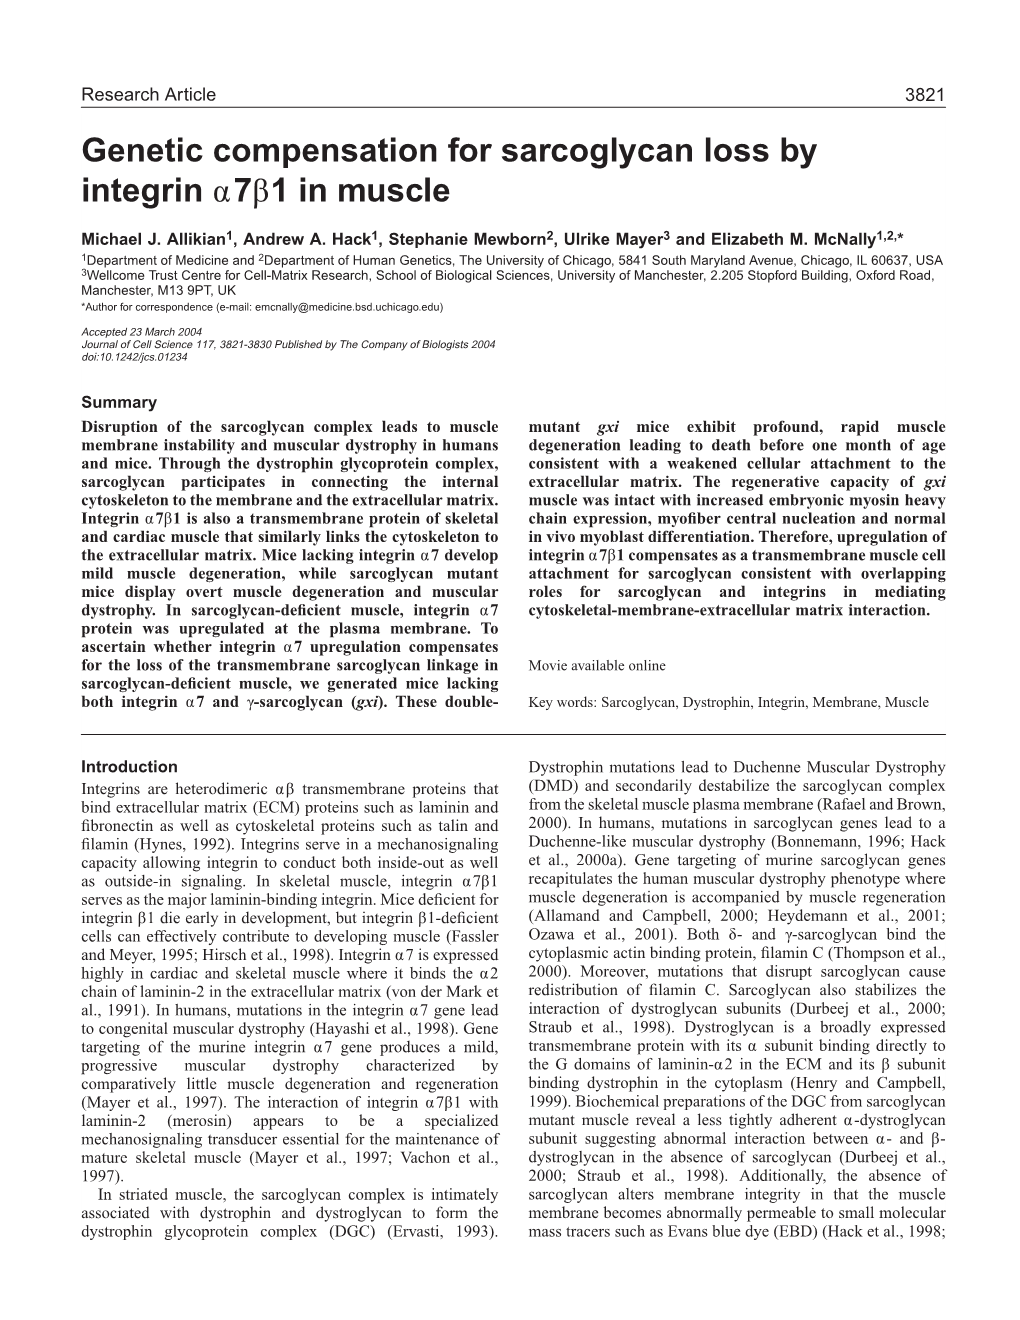 Genetic Compensation for Sarcoglycan Loss by Integrin Α7β1 in Muscle